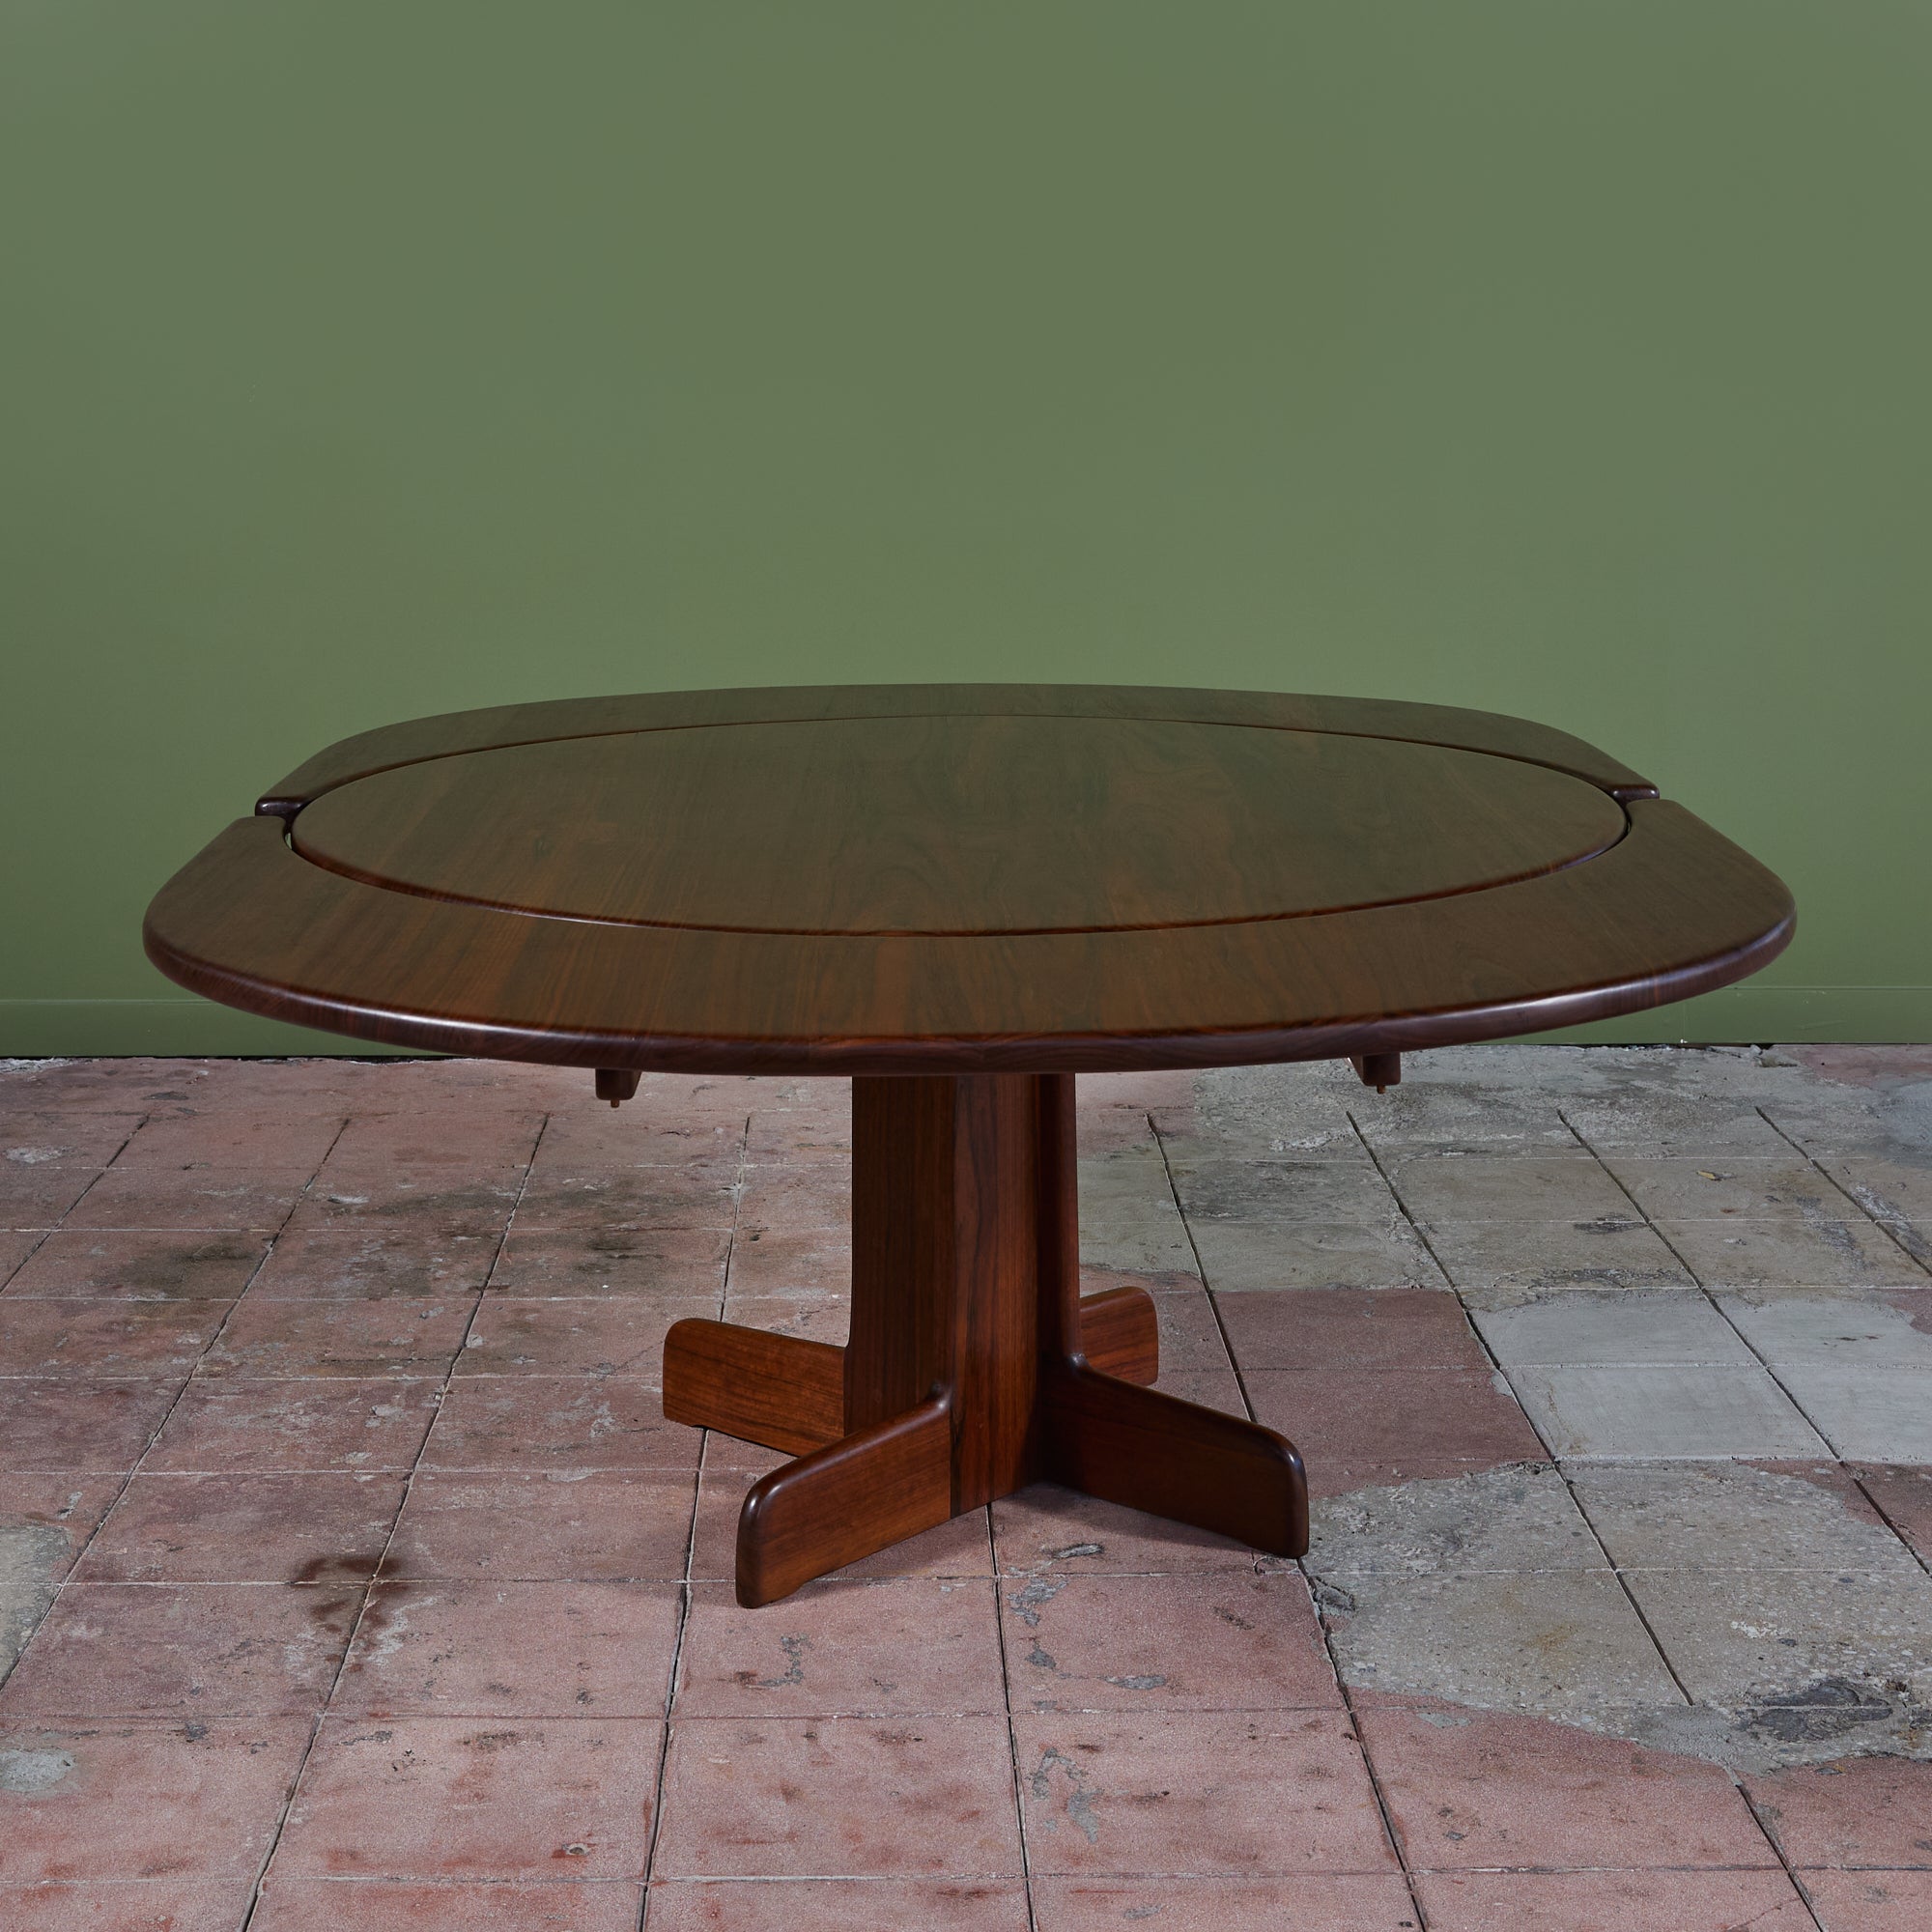 Gerald McCabe Shedua Dining Table